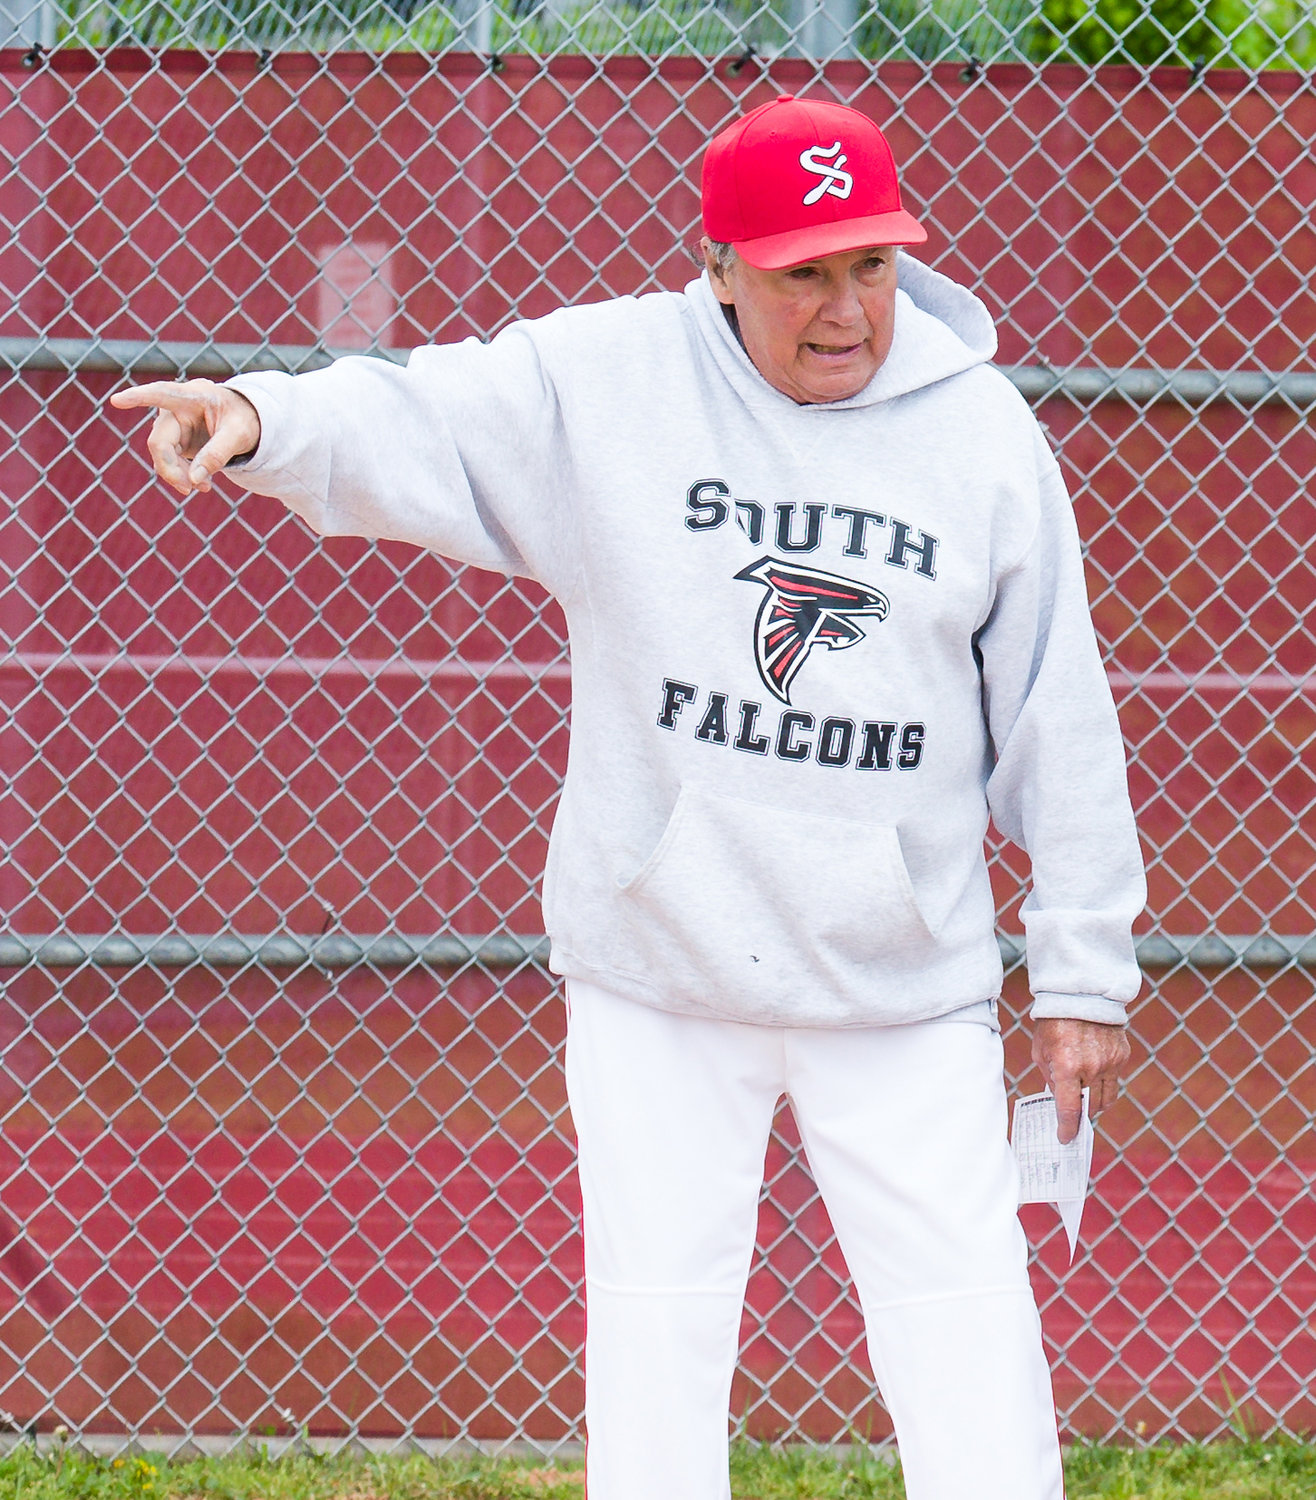 Ken Ward led Valley Stream South's baseball team to 344 victories and six conference titles over 29 seasons.